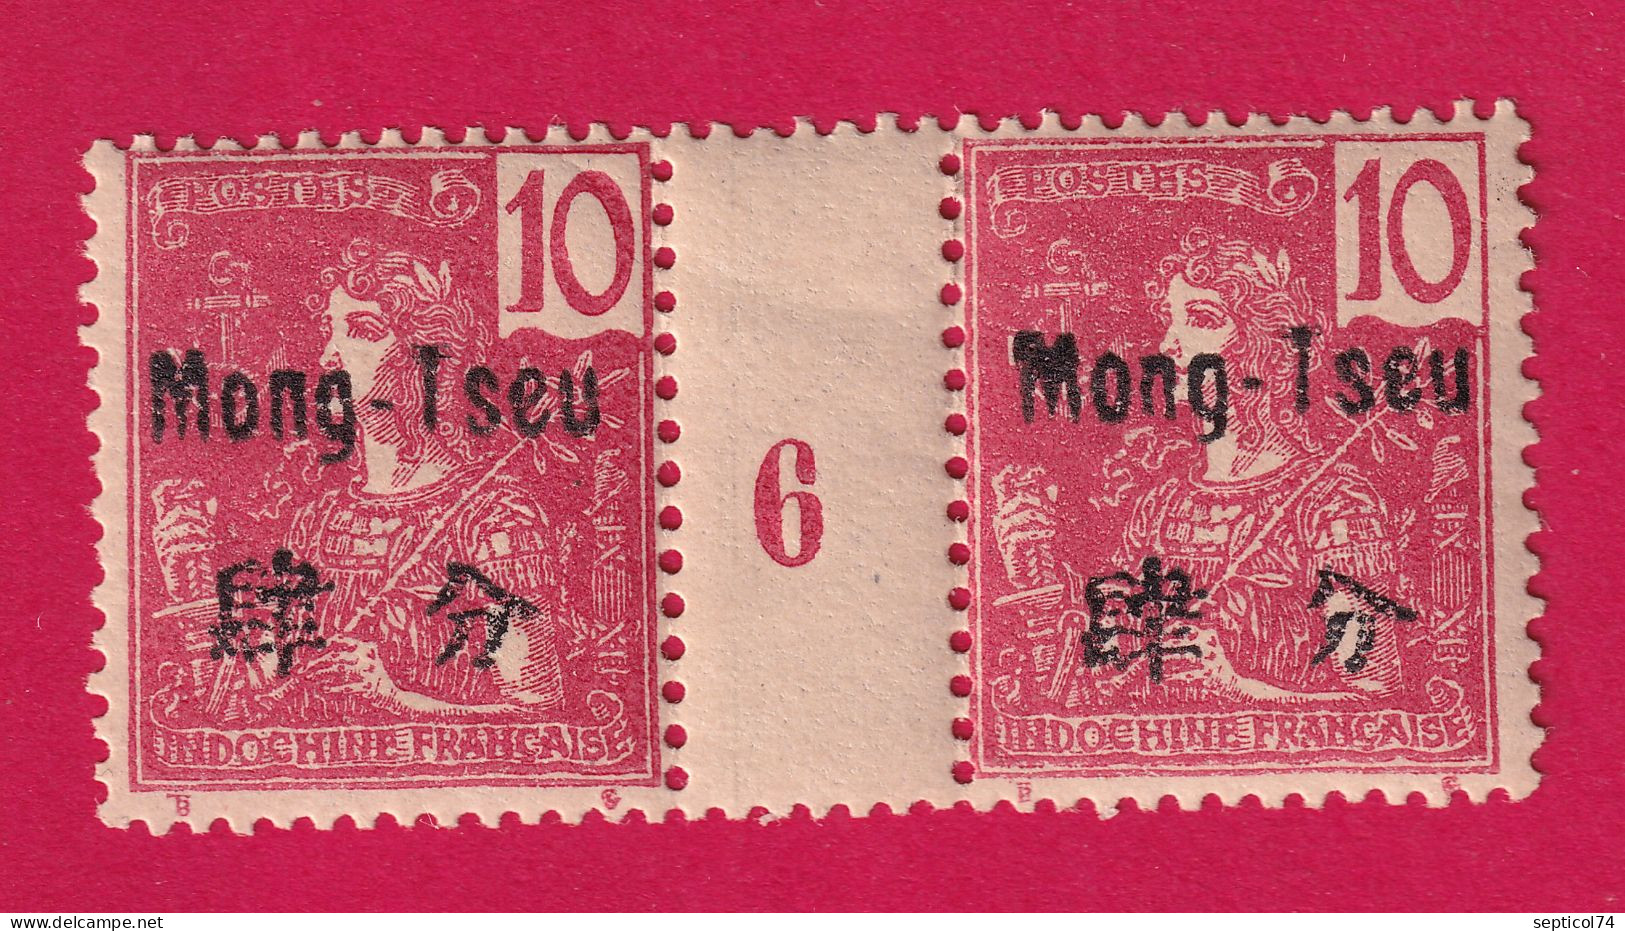 MONG TZEU CHINE N°21 PAIRE MILLESIME 6 NEUF SANS CHARNIERE COTE 380€ TIMBRE STAMP BRIEFMARKEN CHINA - Unused Stamps